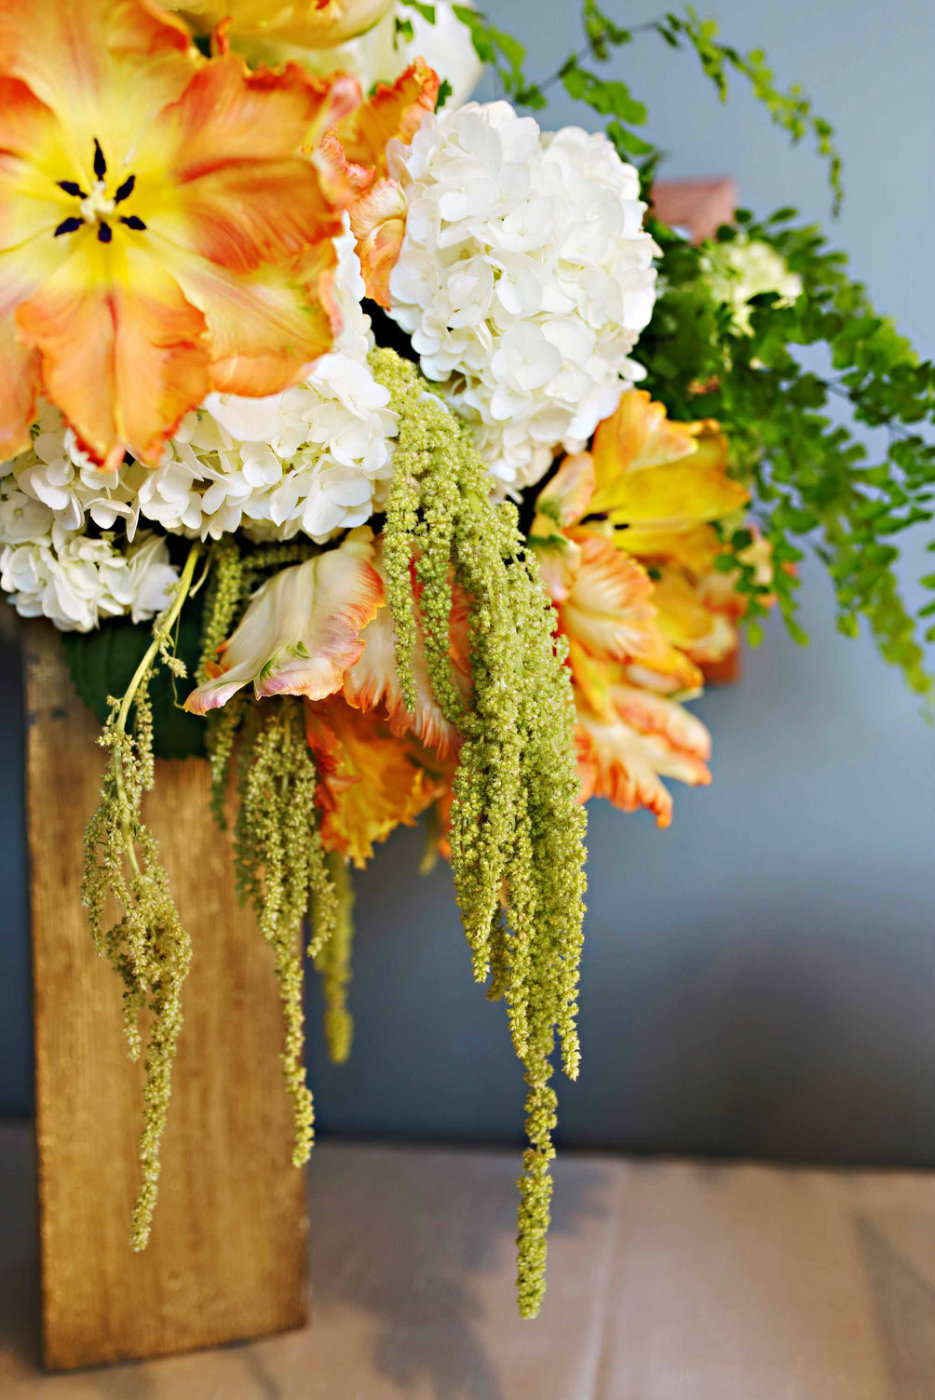 Beautiful orange parrot tulips mimic the Chihuly sculpture shapes for our spring wedding.